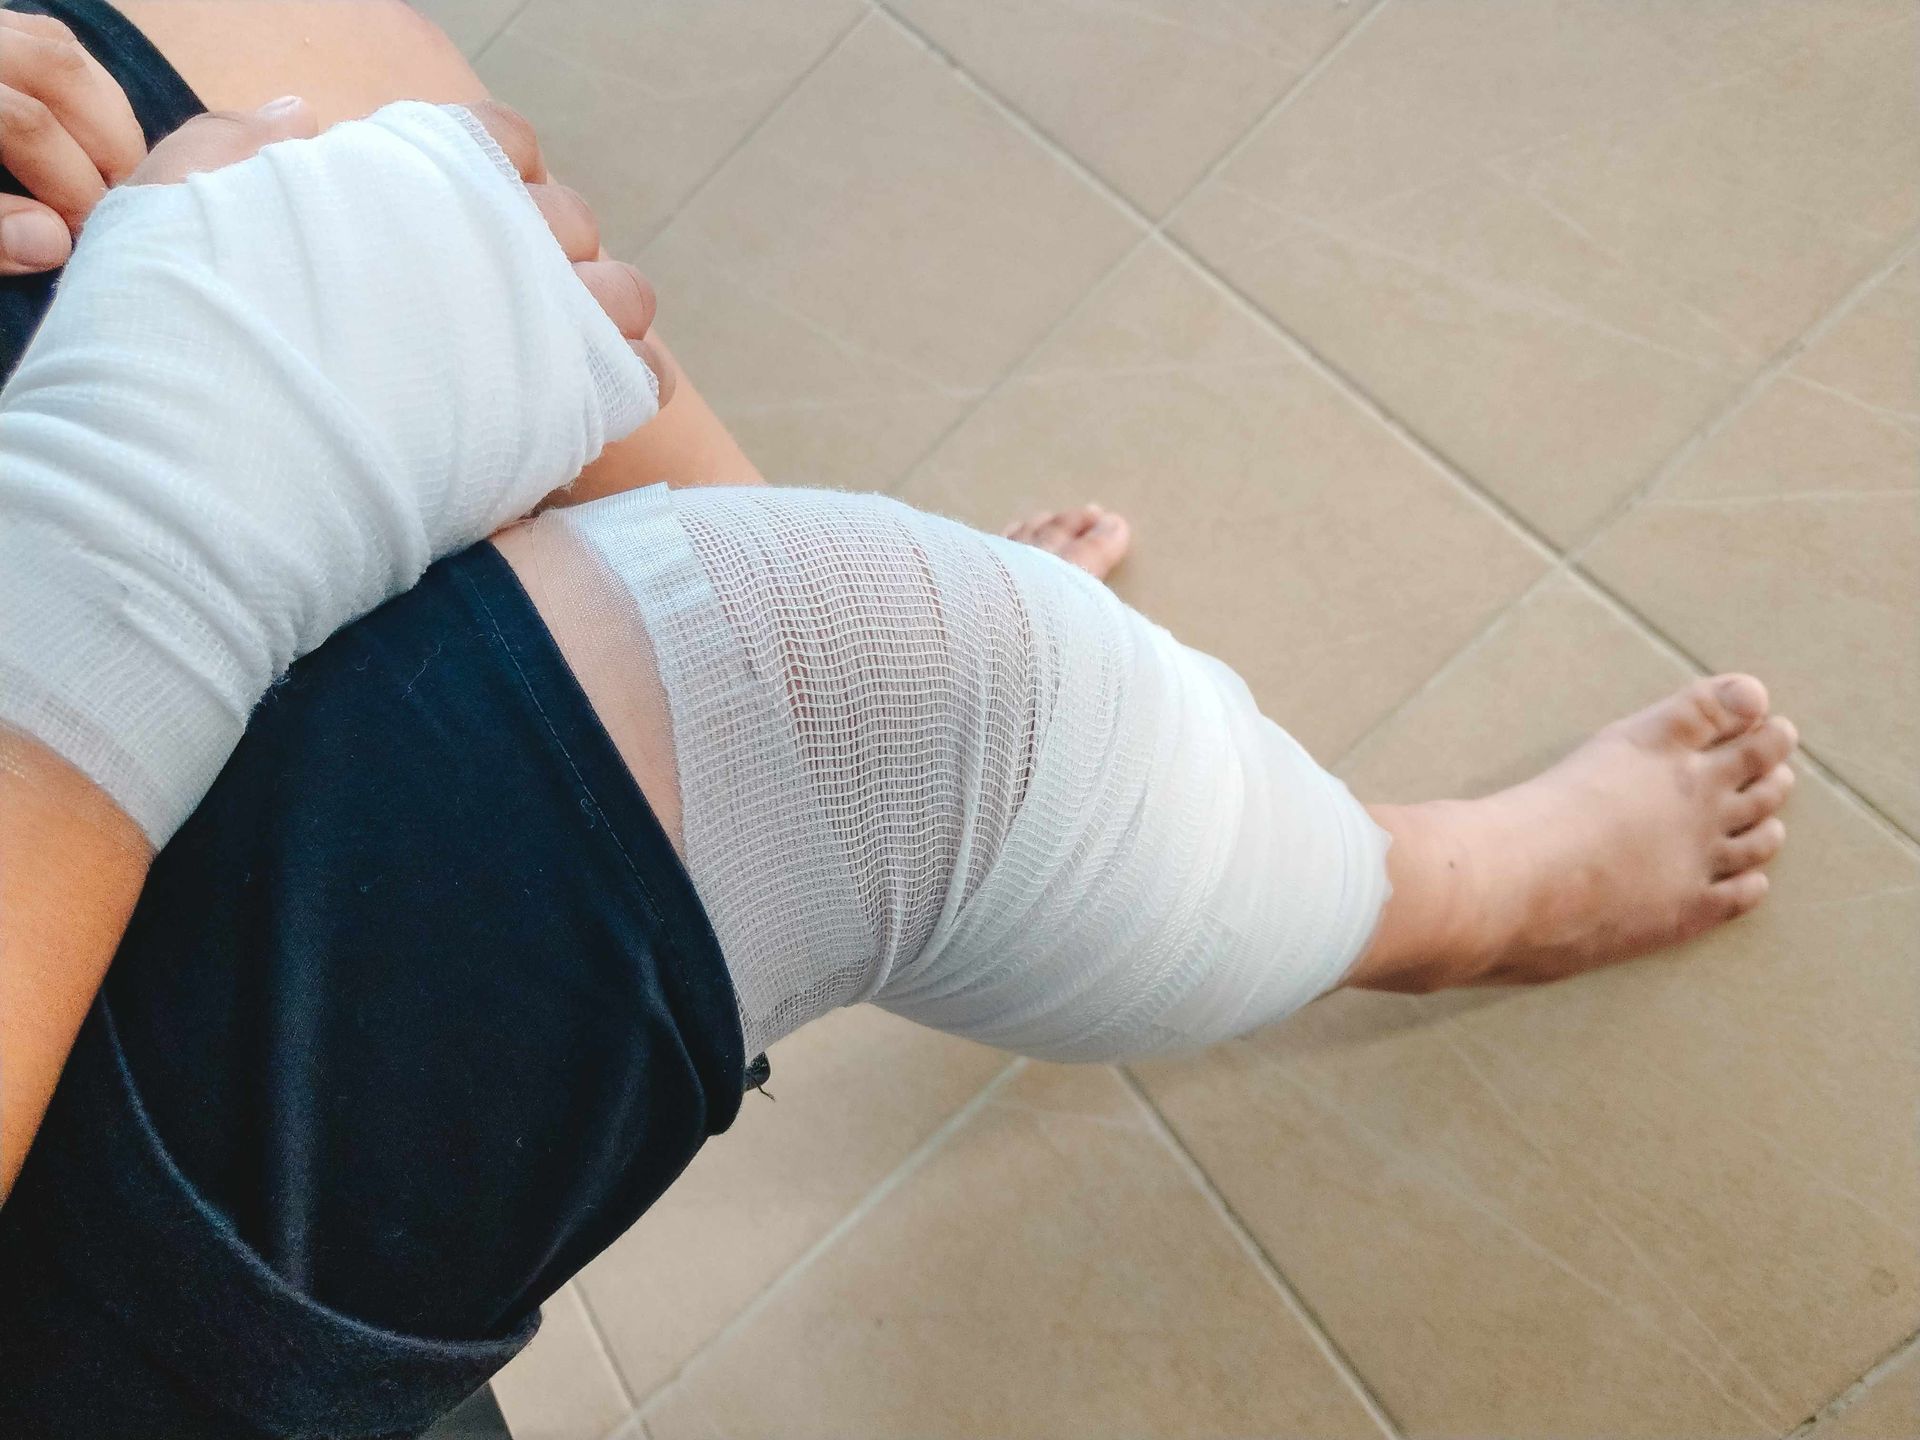 a person with a bandage on their leg